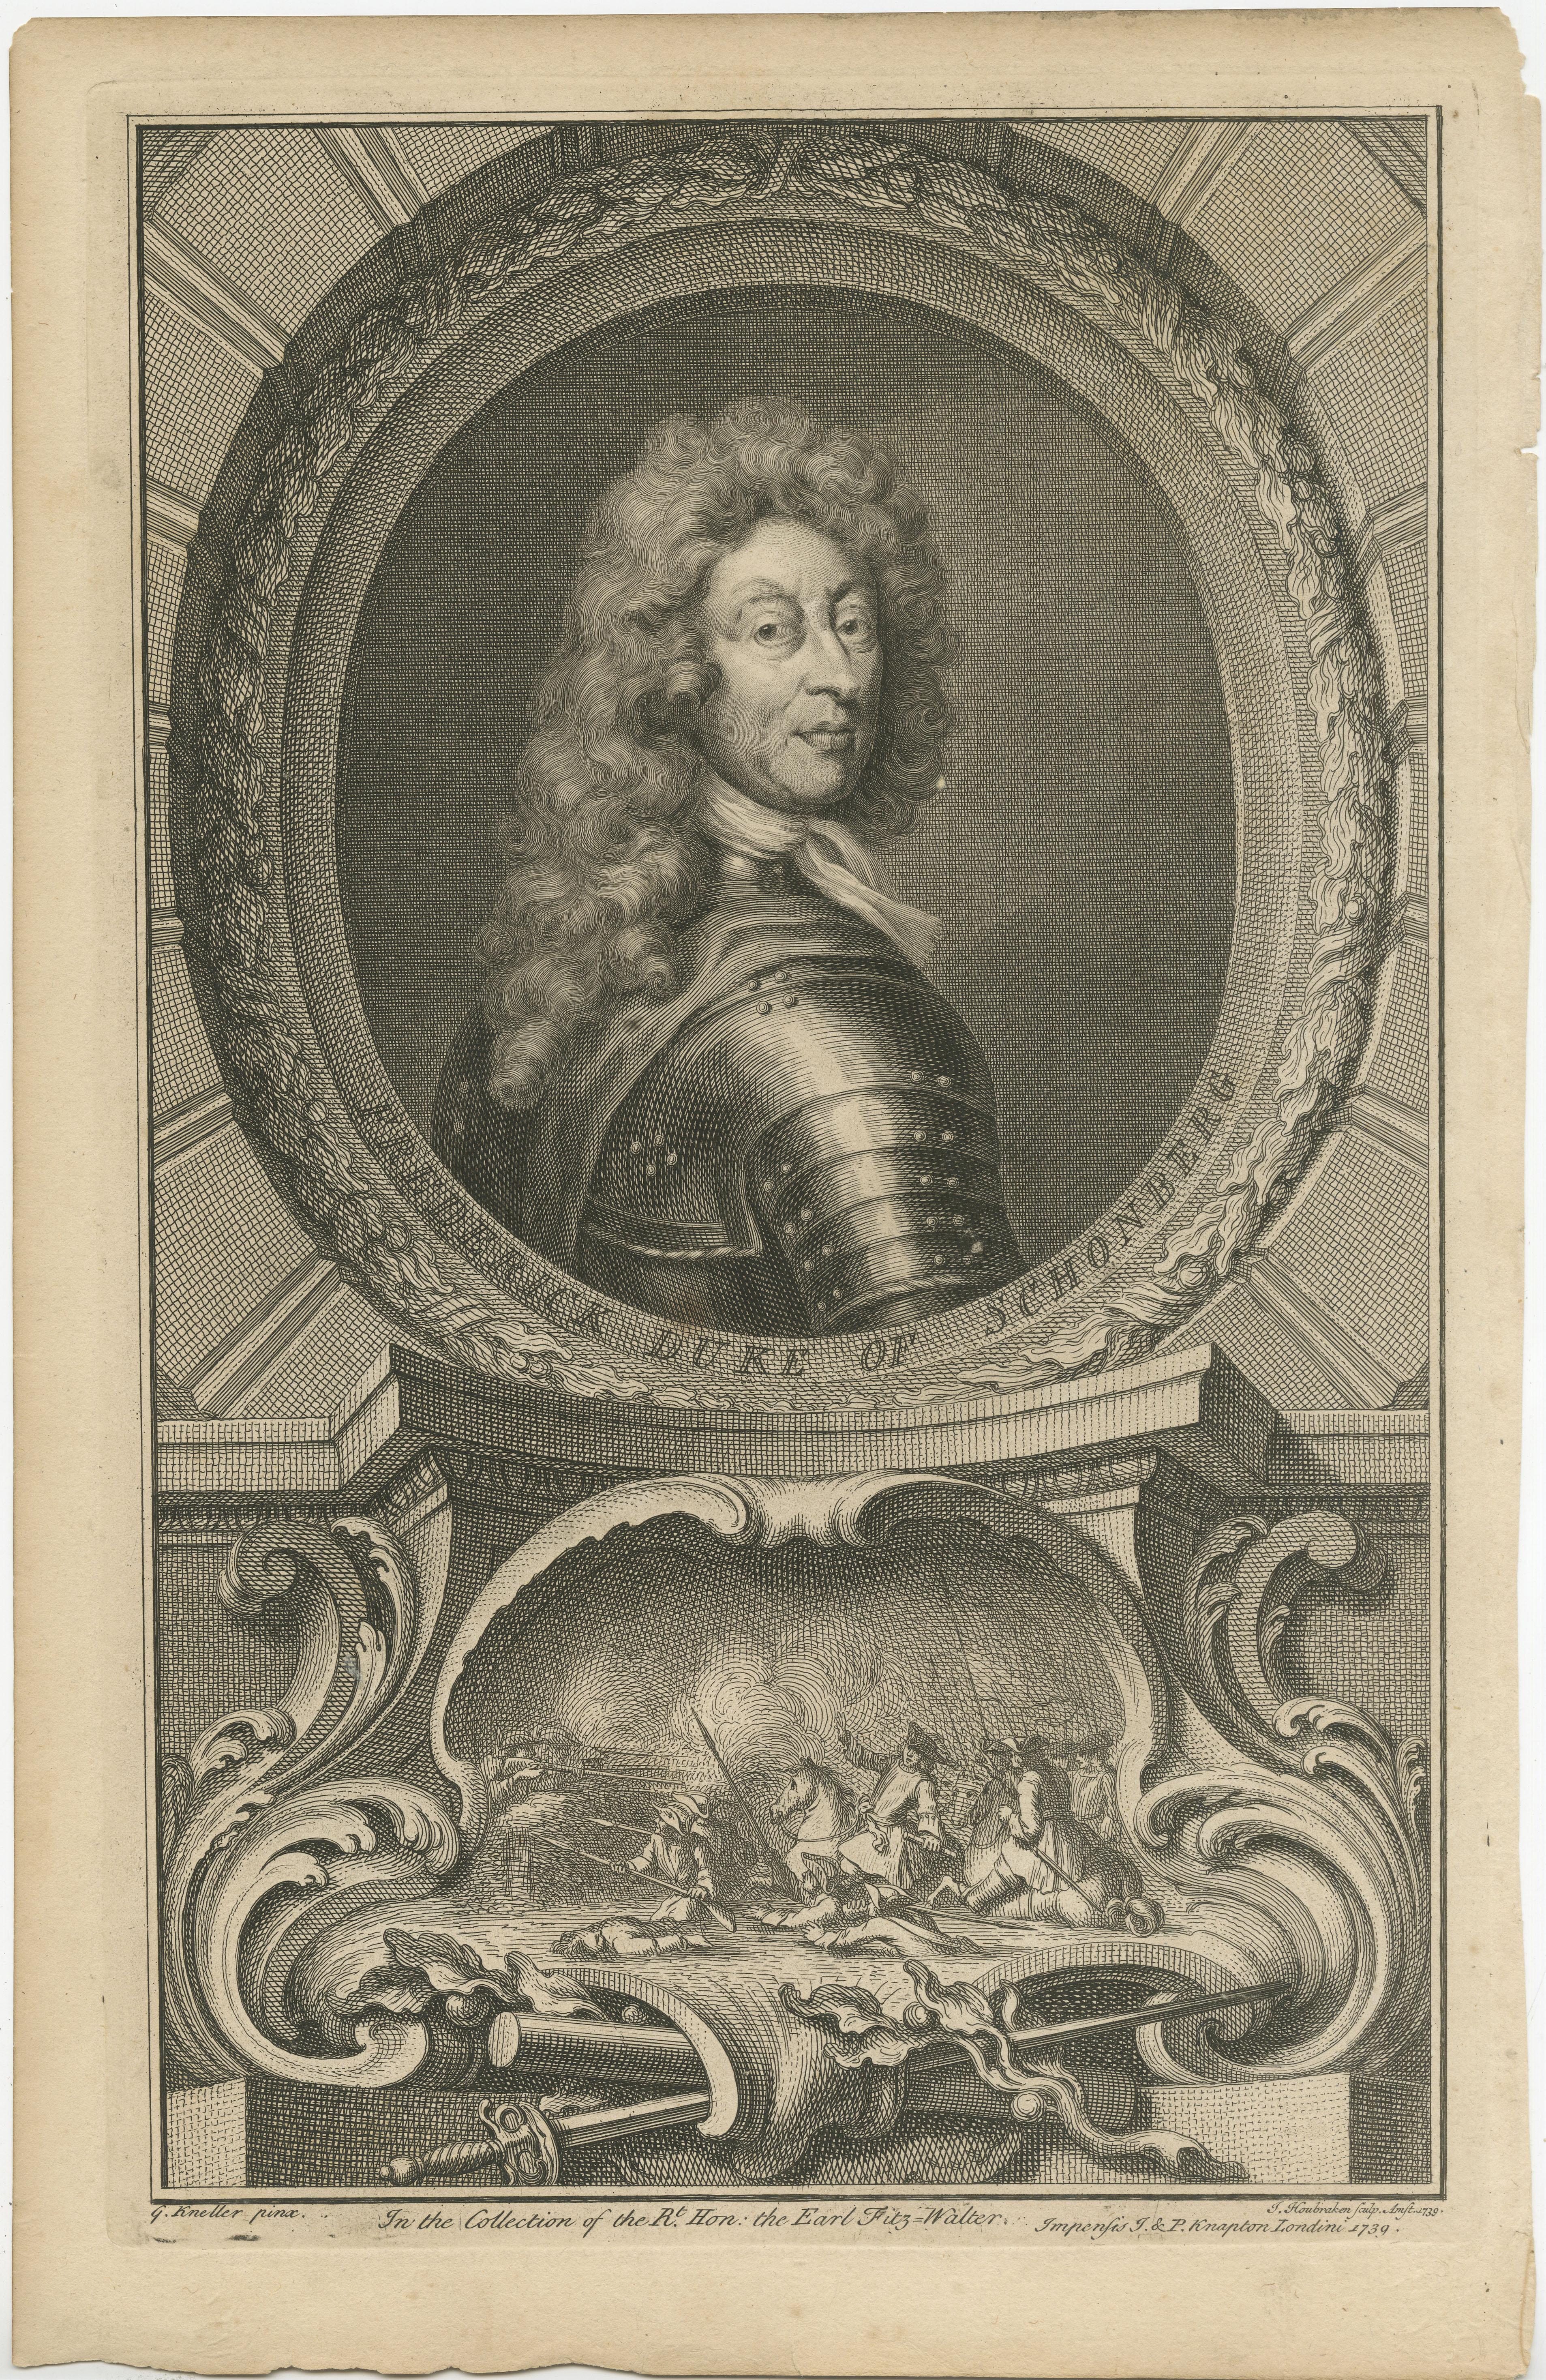 Antique portrait titled 'Frederick Duke of Schonberg'. Old print of Friedrich Herman, 1st Duke of Schomberg, in profile to right looking at viewer over his right shoulder wearing armour and a long wig in an architectural oval with a vignette with a